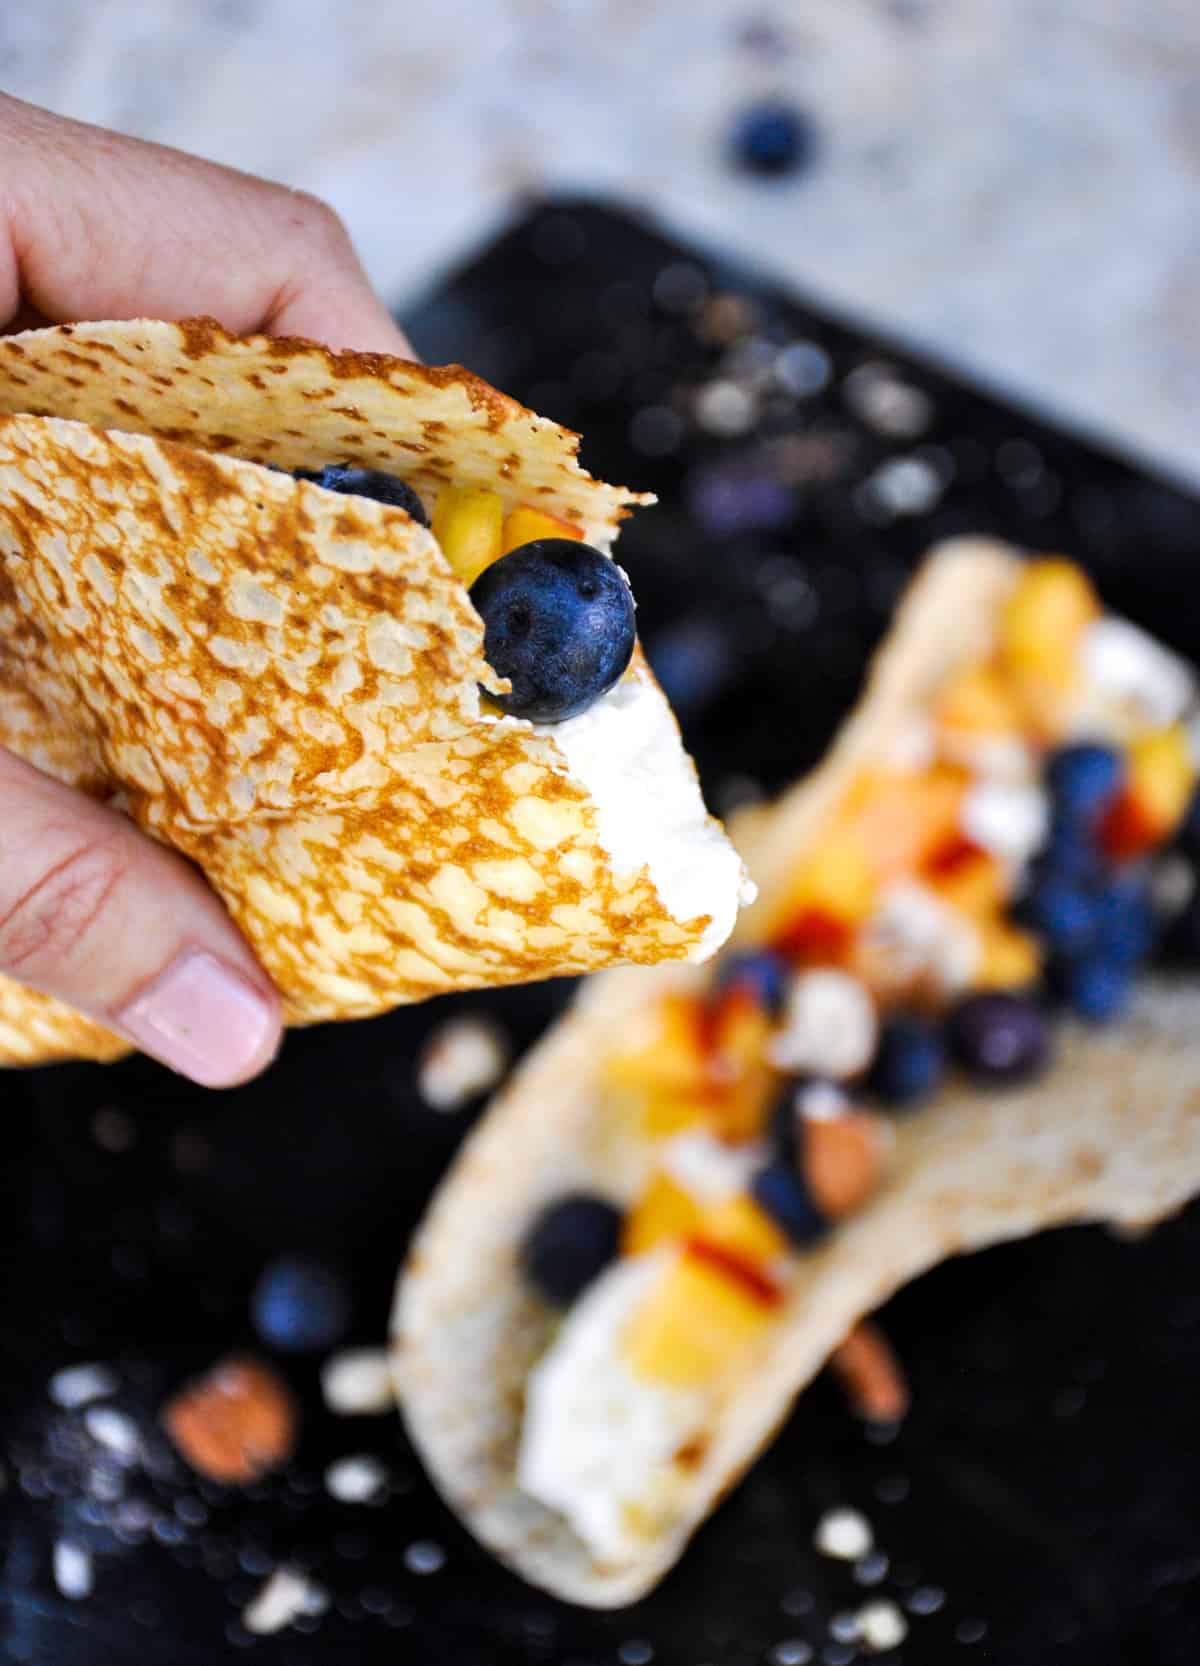 Dessert tacos with nectarine and blueberry